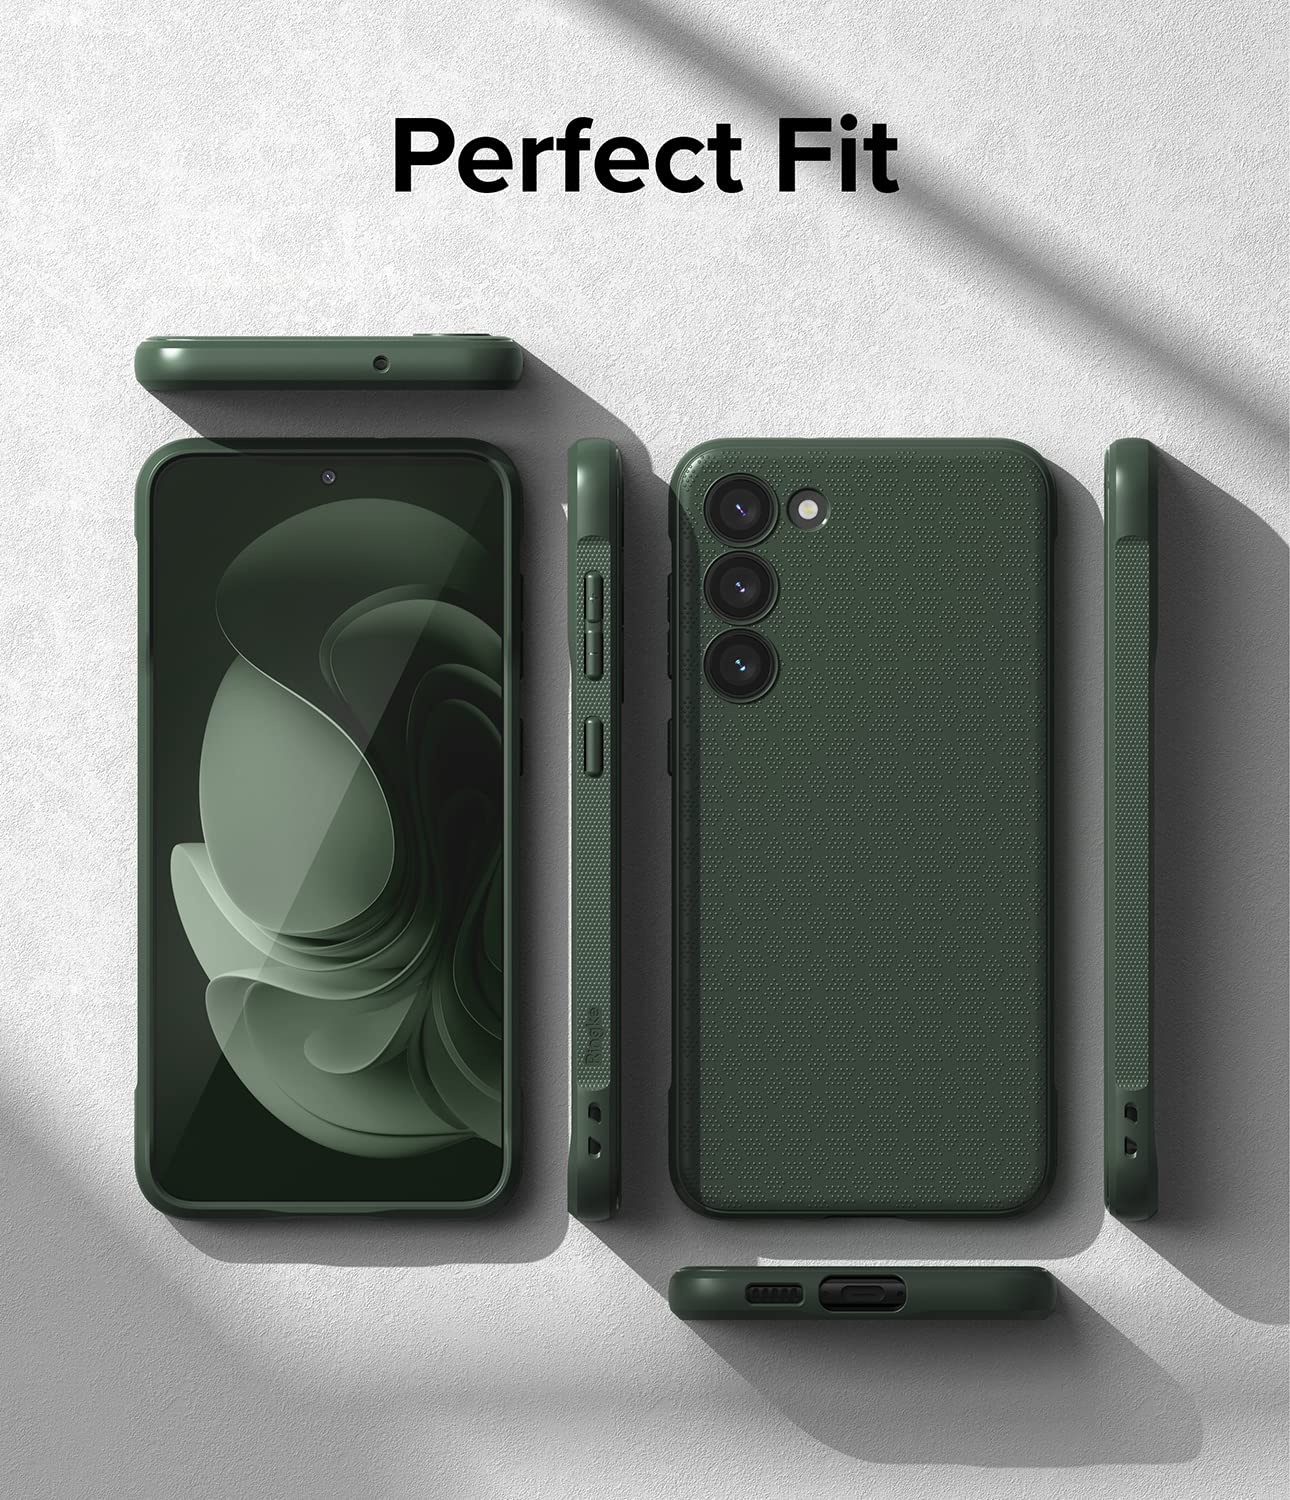 Ringke Onyx [Feels Good in The Hand] Compatible with Samsung Galaxy S23 Plus Case 5G, Anti-Fingerprint Technology Non-Slip Enhanced Grip Smudge Proof Cover Designed for S23 Plus Case - Dark Green